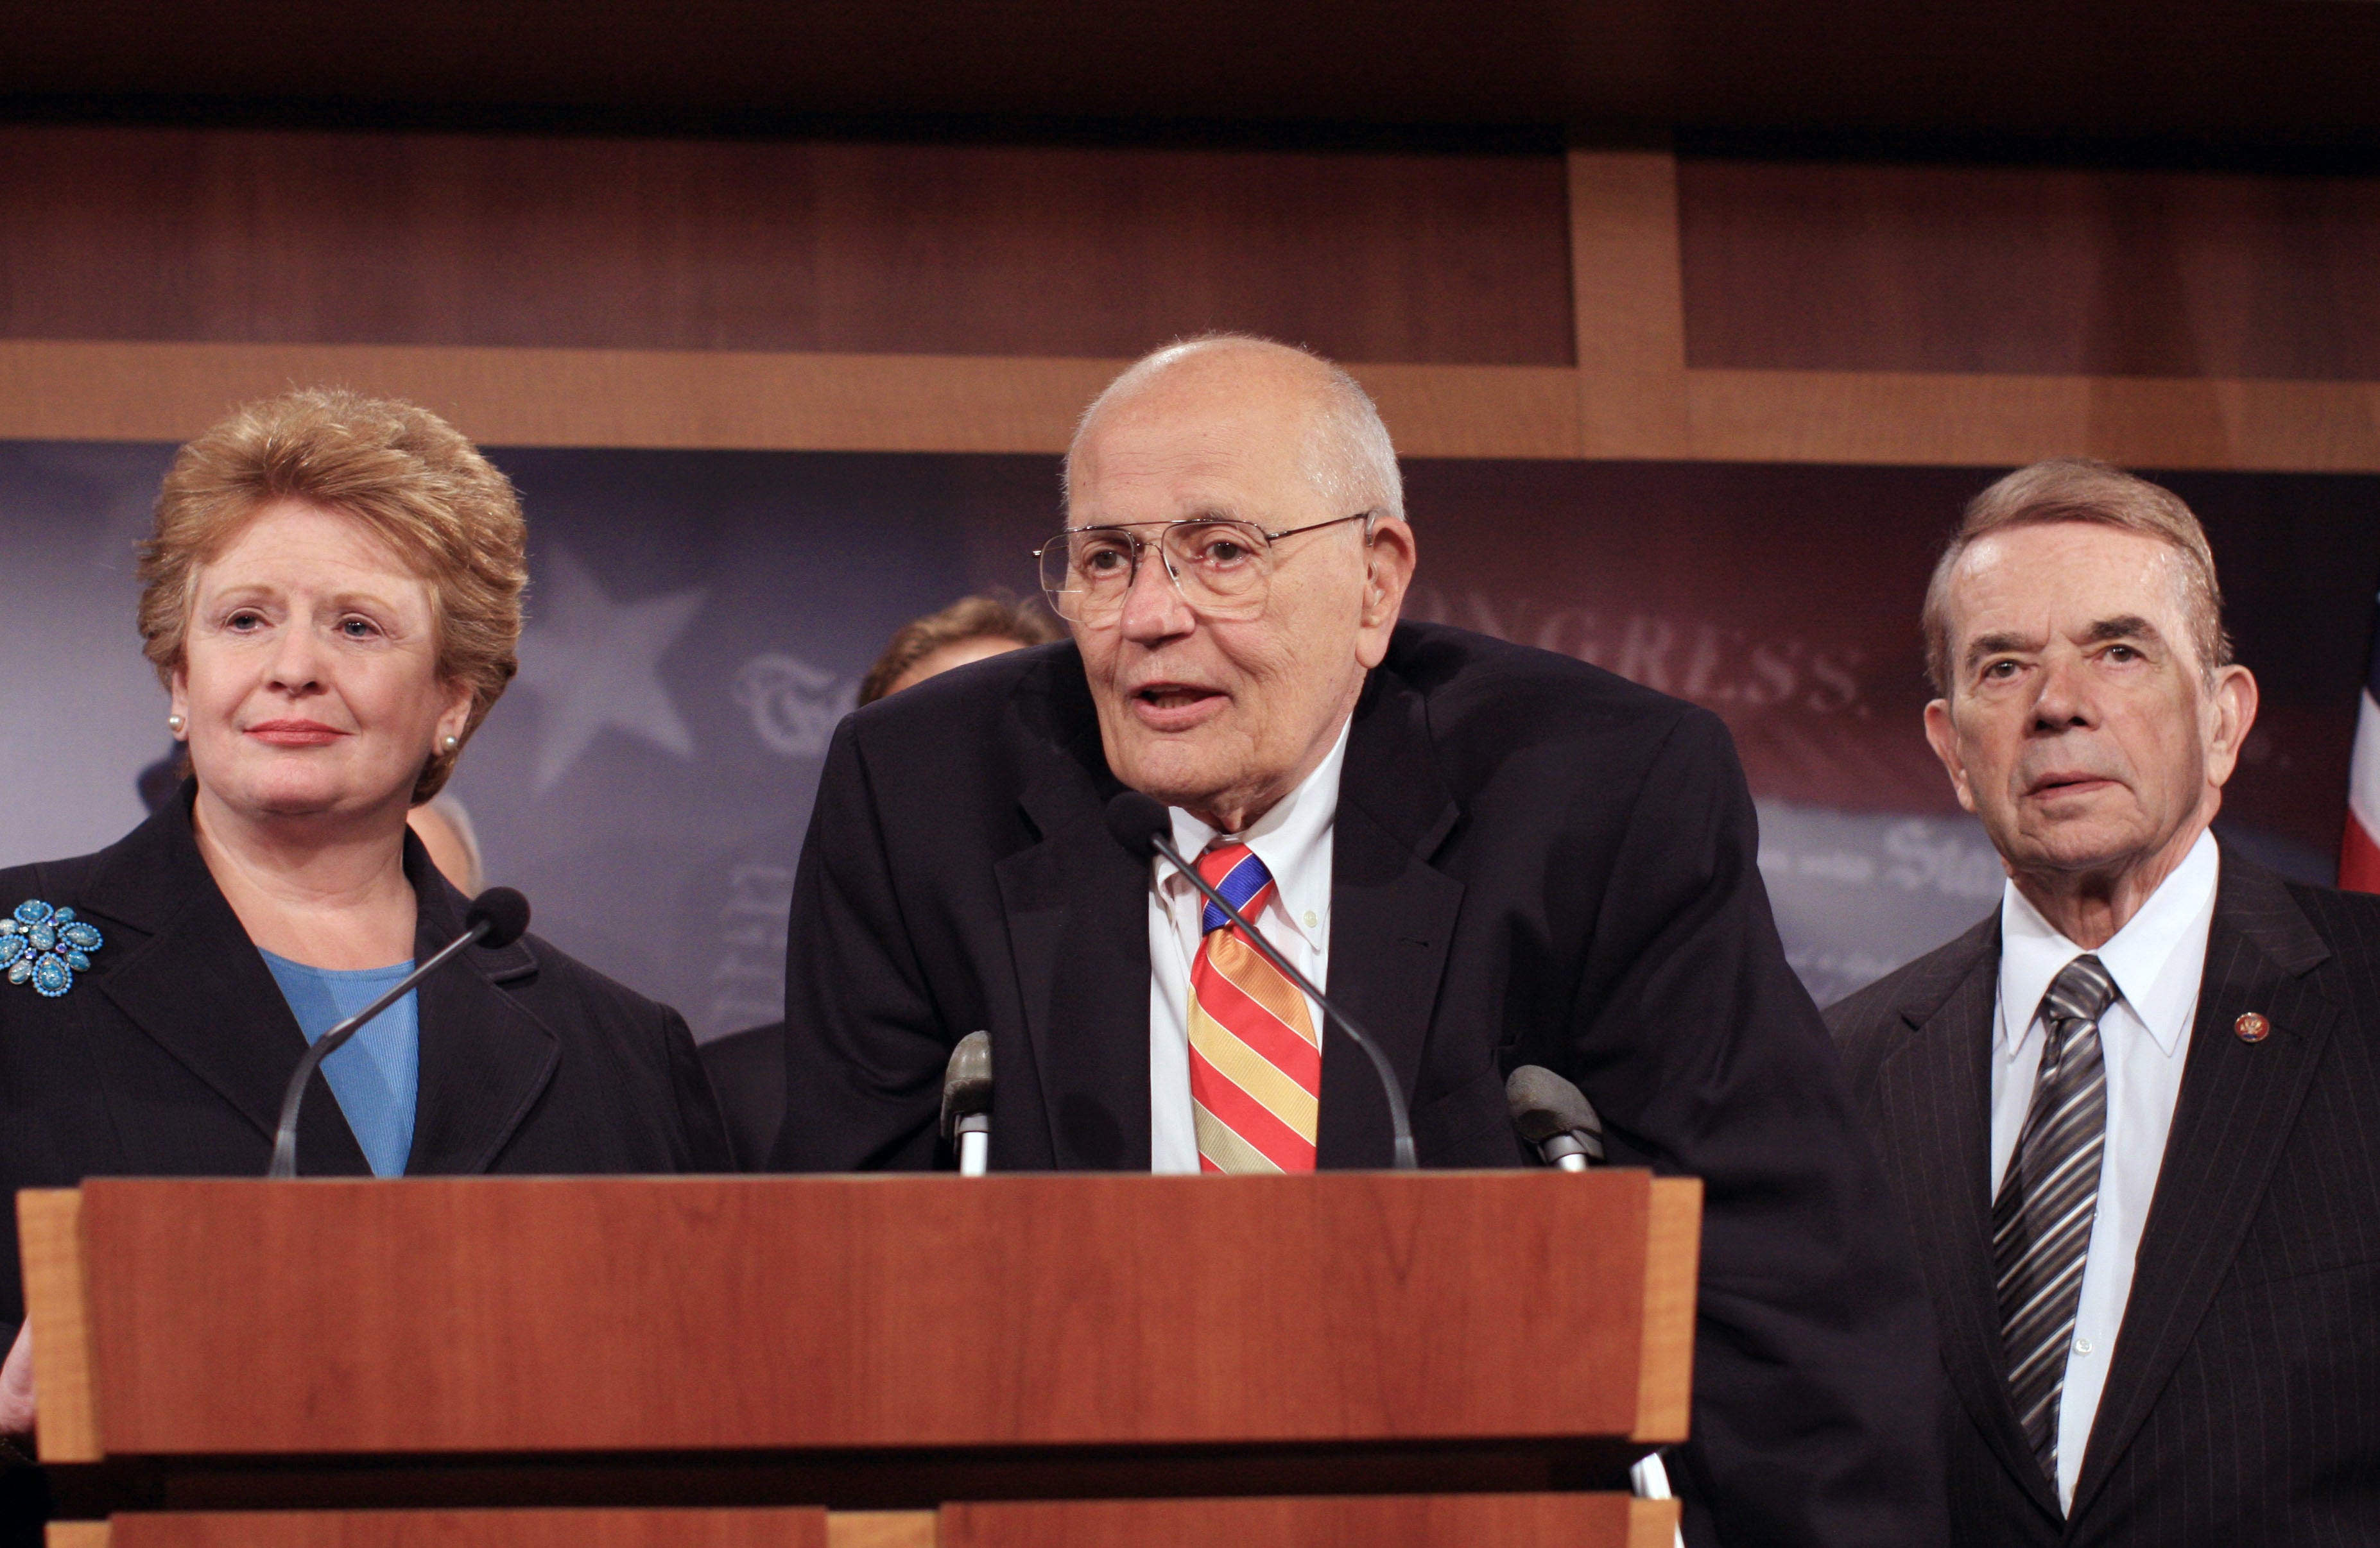 House Energy and Commerce Committee Chairman Rep. John Dingell, D-Mich., center, flanked by Sen. Debbie Stabenow, D-Mich., left, and Rep. Dale Kildee, D-Mich., meets with reporters on Capitol Hill in Washington, Wednesday, Sept. 24, 2008, to discuss a House budget plan expected to be considered by Congress that includes funding for $25 billion in loans for Detroit's automakers.